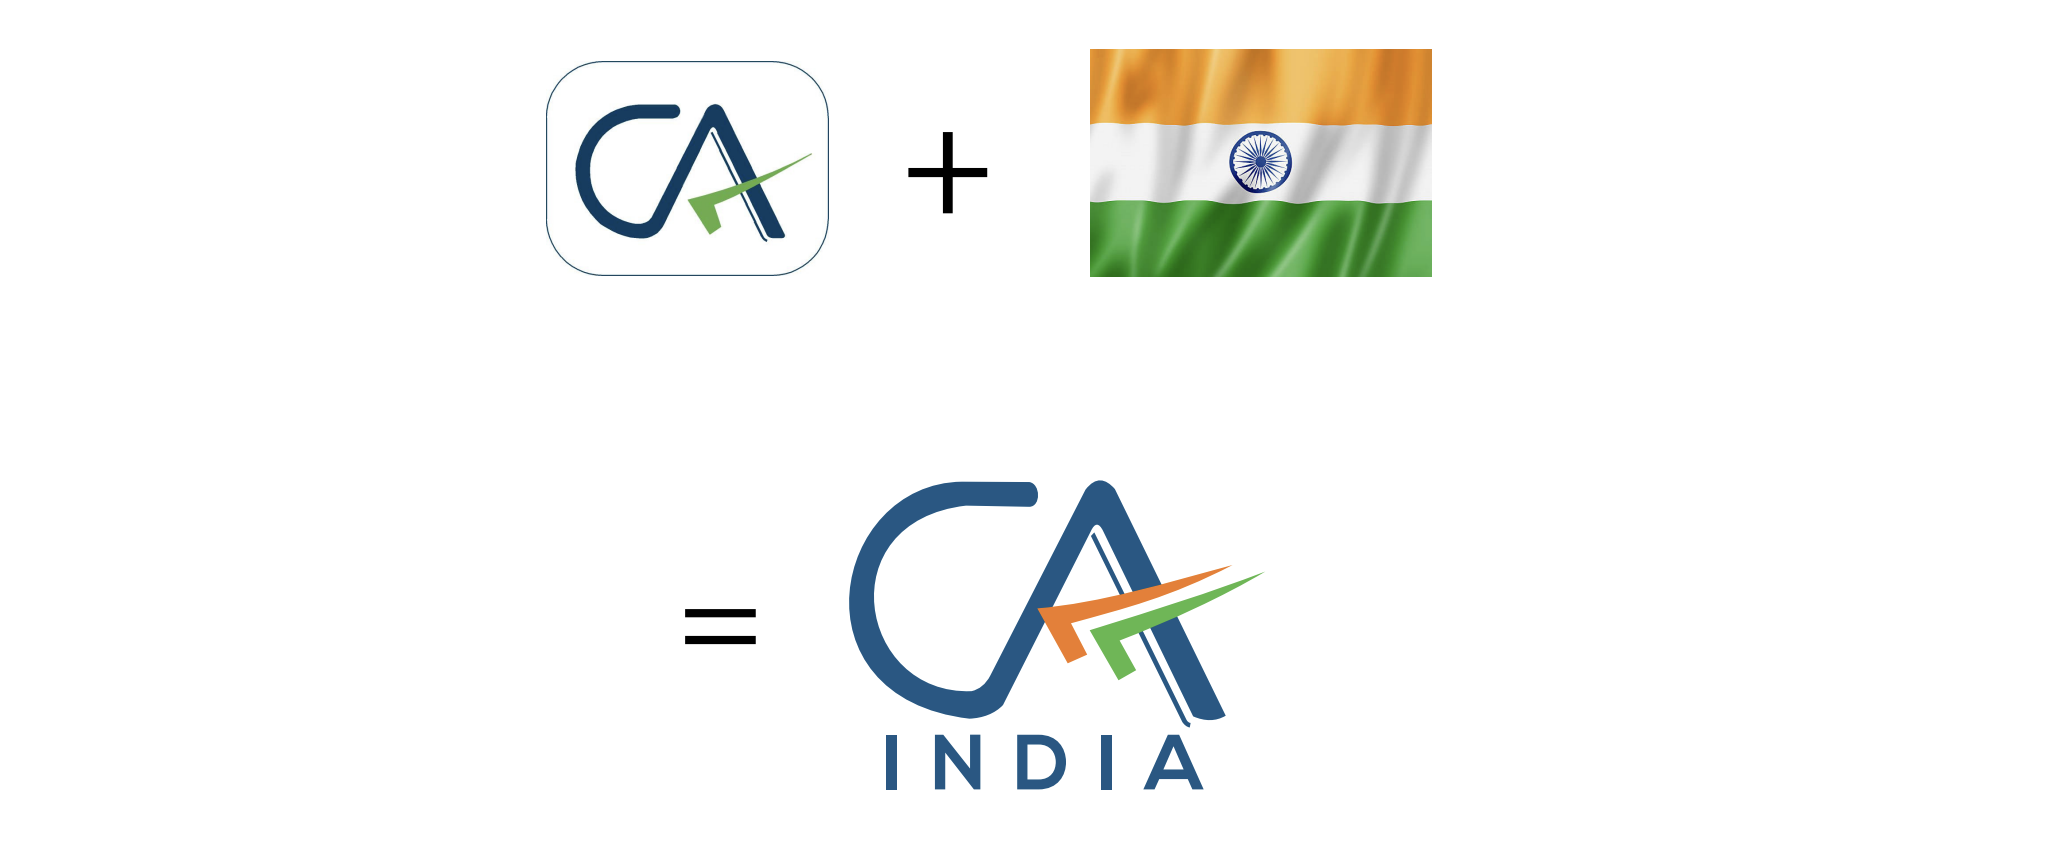 Download COAL INDIA Logo PNG and Vector (PDF, SVG, Ai, EPS) Free